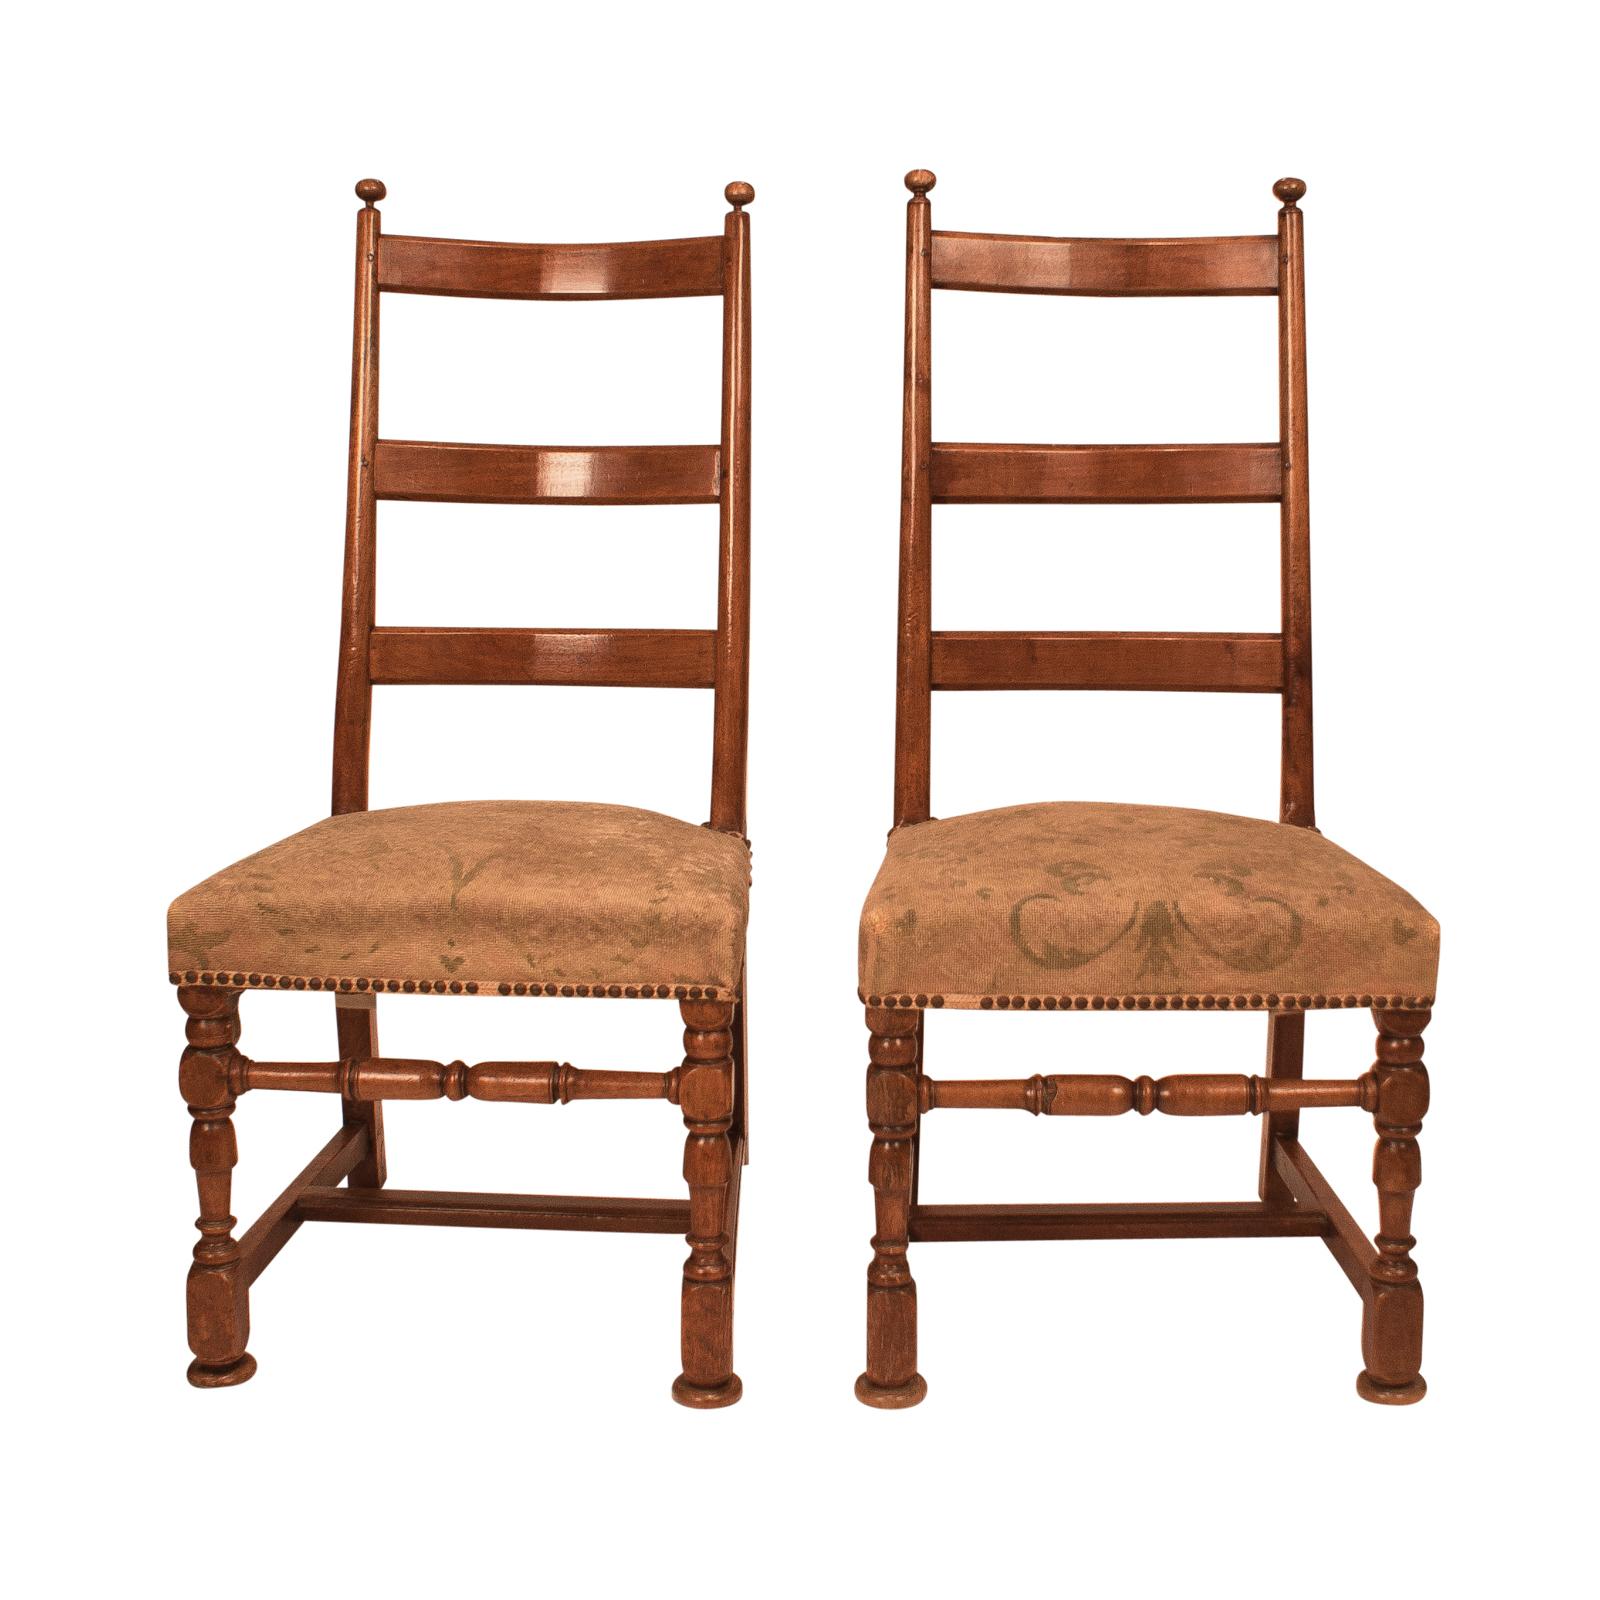 Pair of Baroque Side Chairs, Baltic, circa 1720